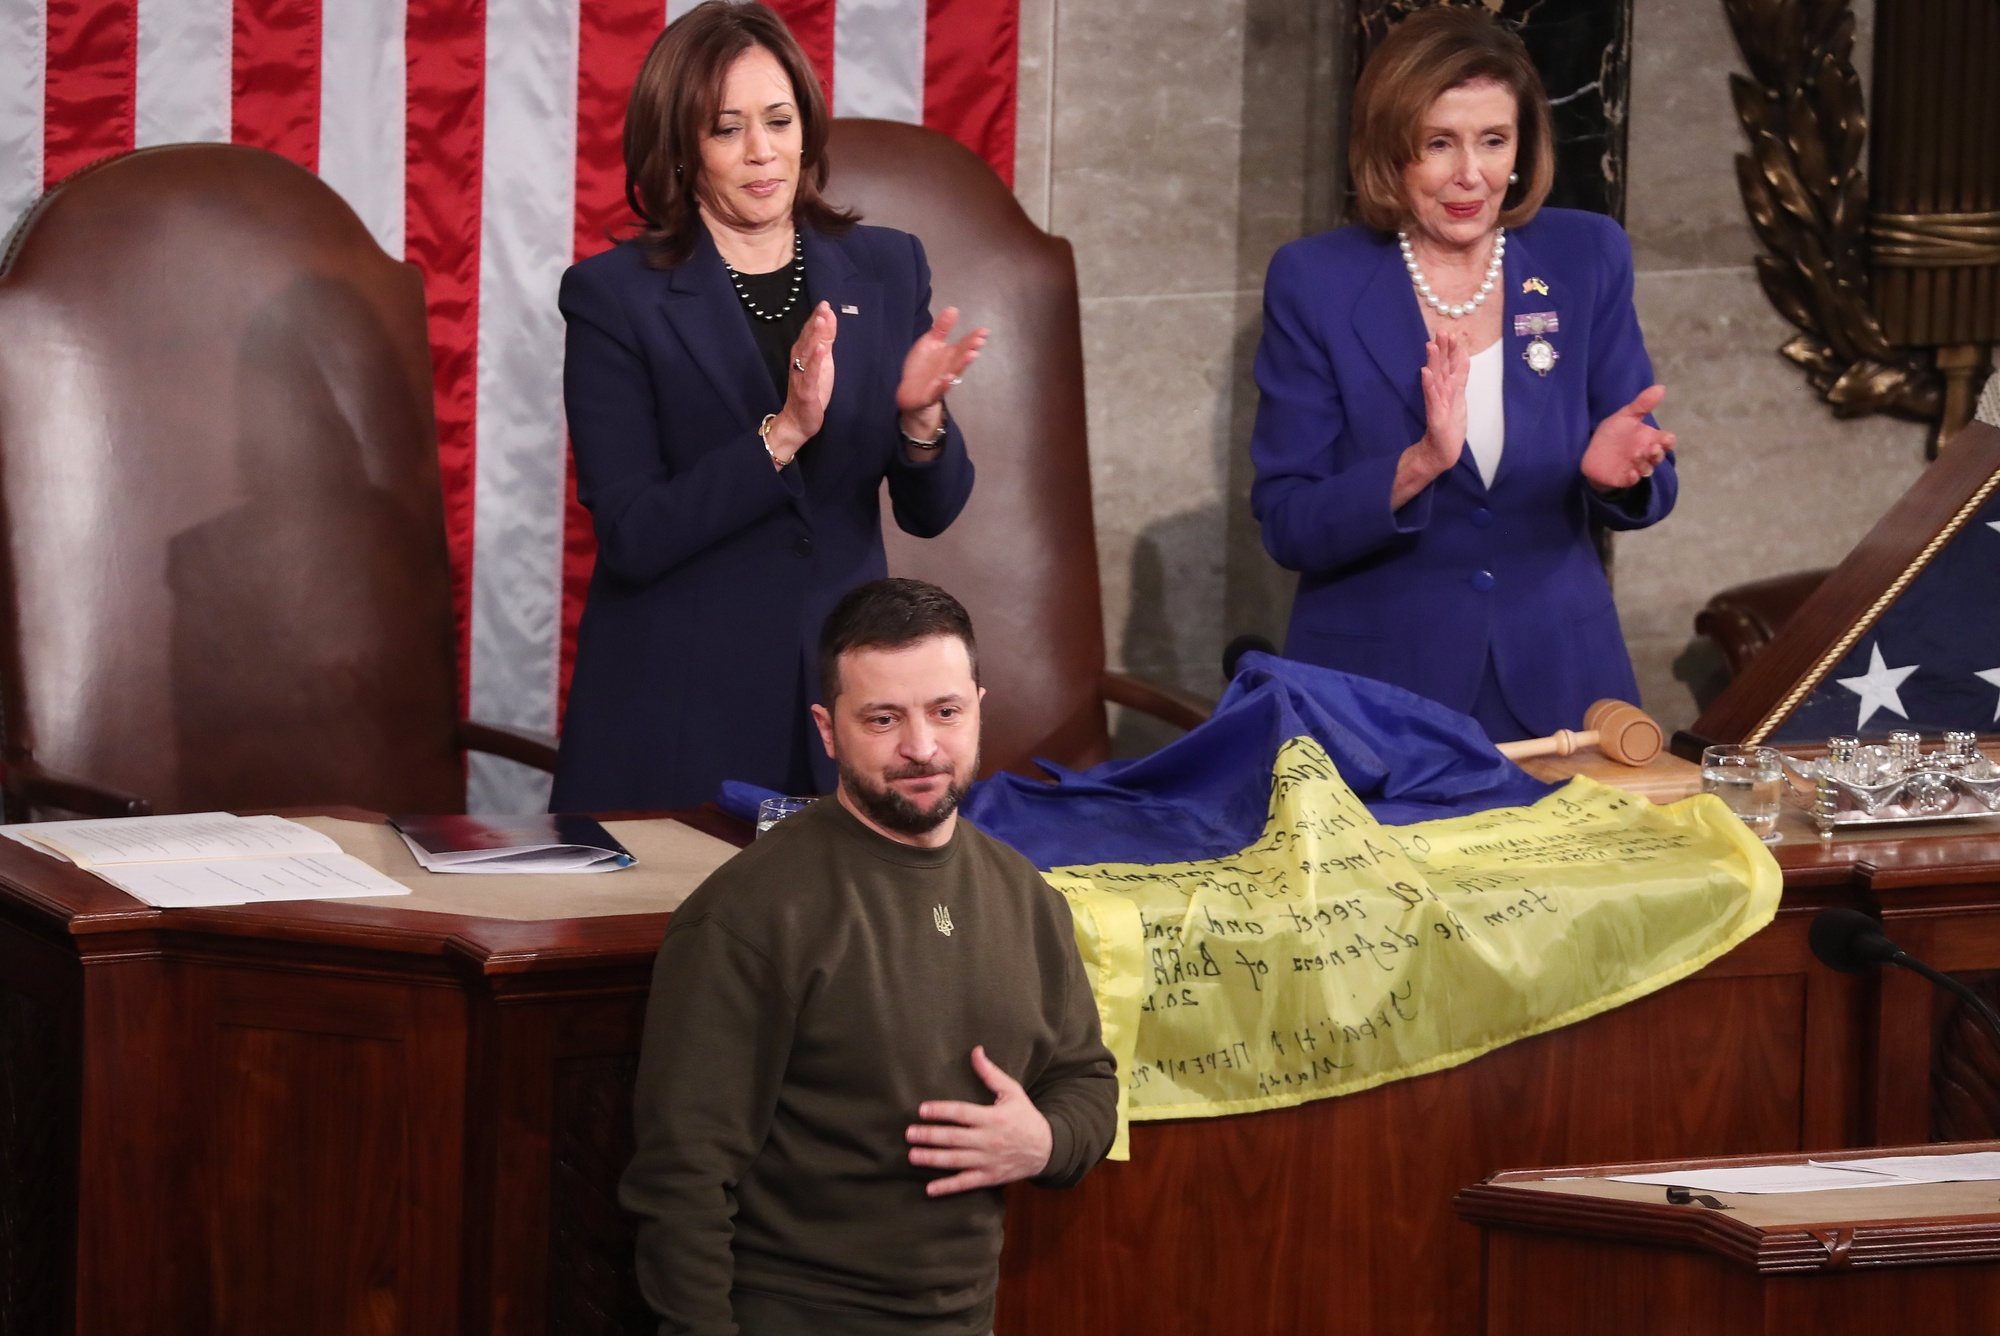 epa10376008 Speaker of the House Nancy Pelosi (C) and US Vice President Kamala Harris (L) hold a Ukrainian flag after Ukrainian President Volodymyr Zelensky  delivered an address to a joint meeting of the United States Congress in the House of Representatives chamber on Capitol Hill in Washington DC, USA, 21 December 2022. Zelensky is on his first known foreign trip since Russia invaded Ukraine more than 300 days ago, travelling to the US on a high-stakes visit to secure support for his war effort.  EPA/MICHAEL REYNOLDS